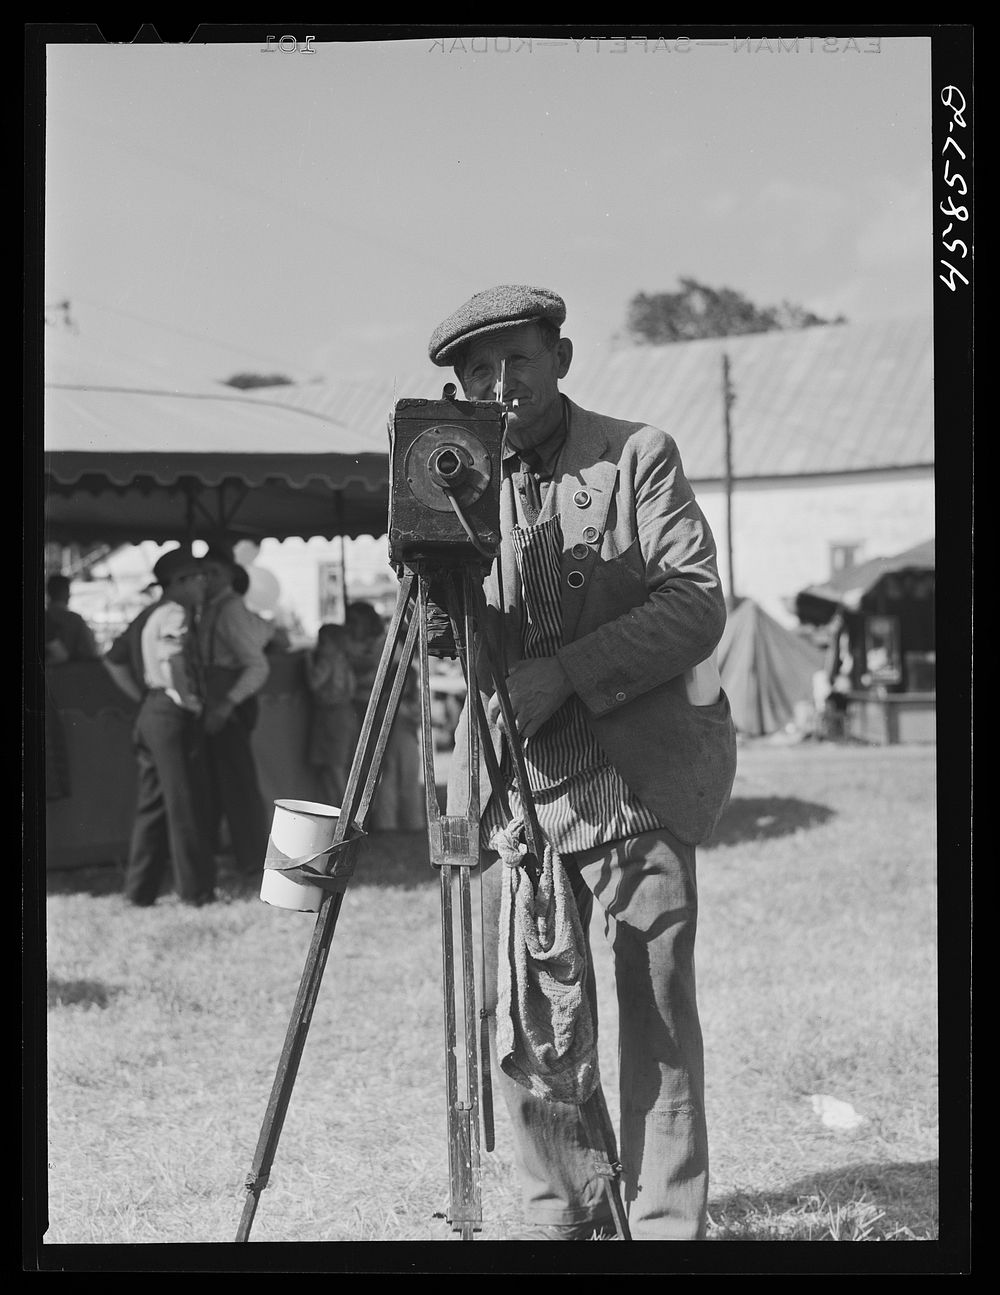 Tintype photographer at the World's Fair. Tunbridge, Vermont. Sourced from the Library of Congress.